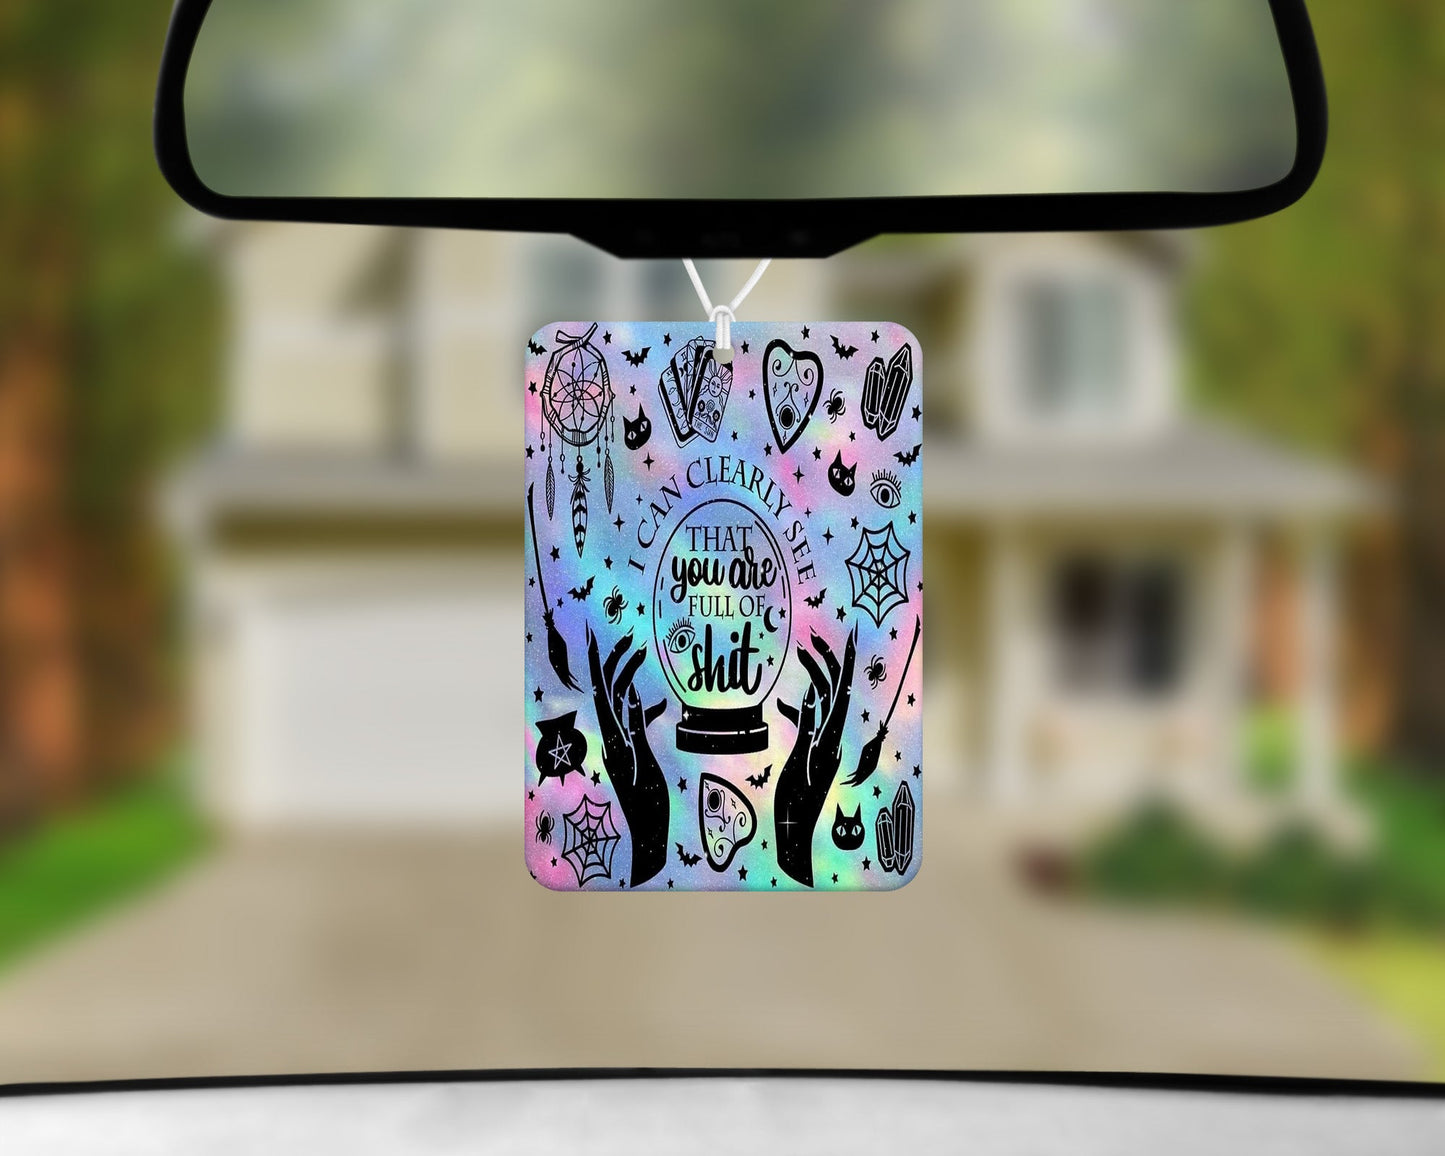 I can Clearly See you are Full Of Shit|Freshie|Includes Scent Bottle - Vehicle Air Freshener